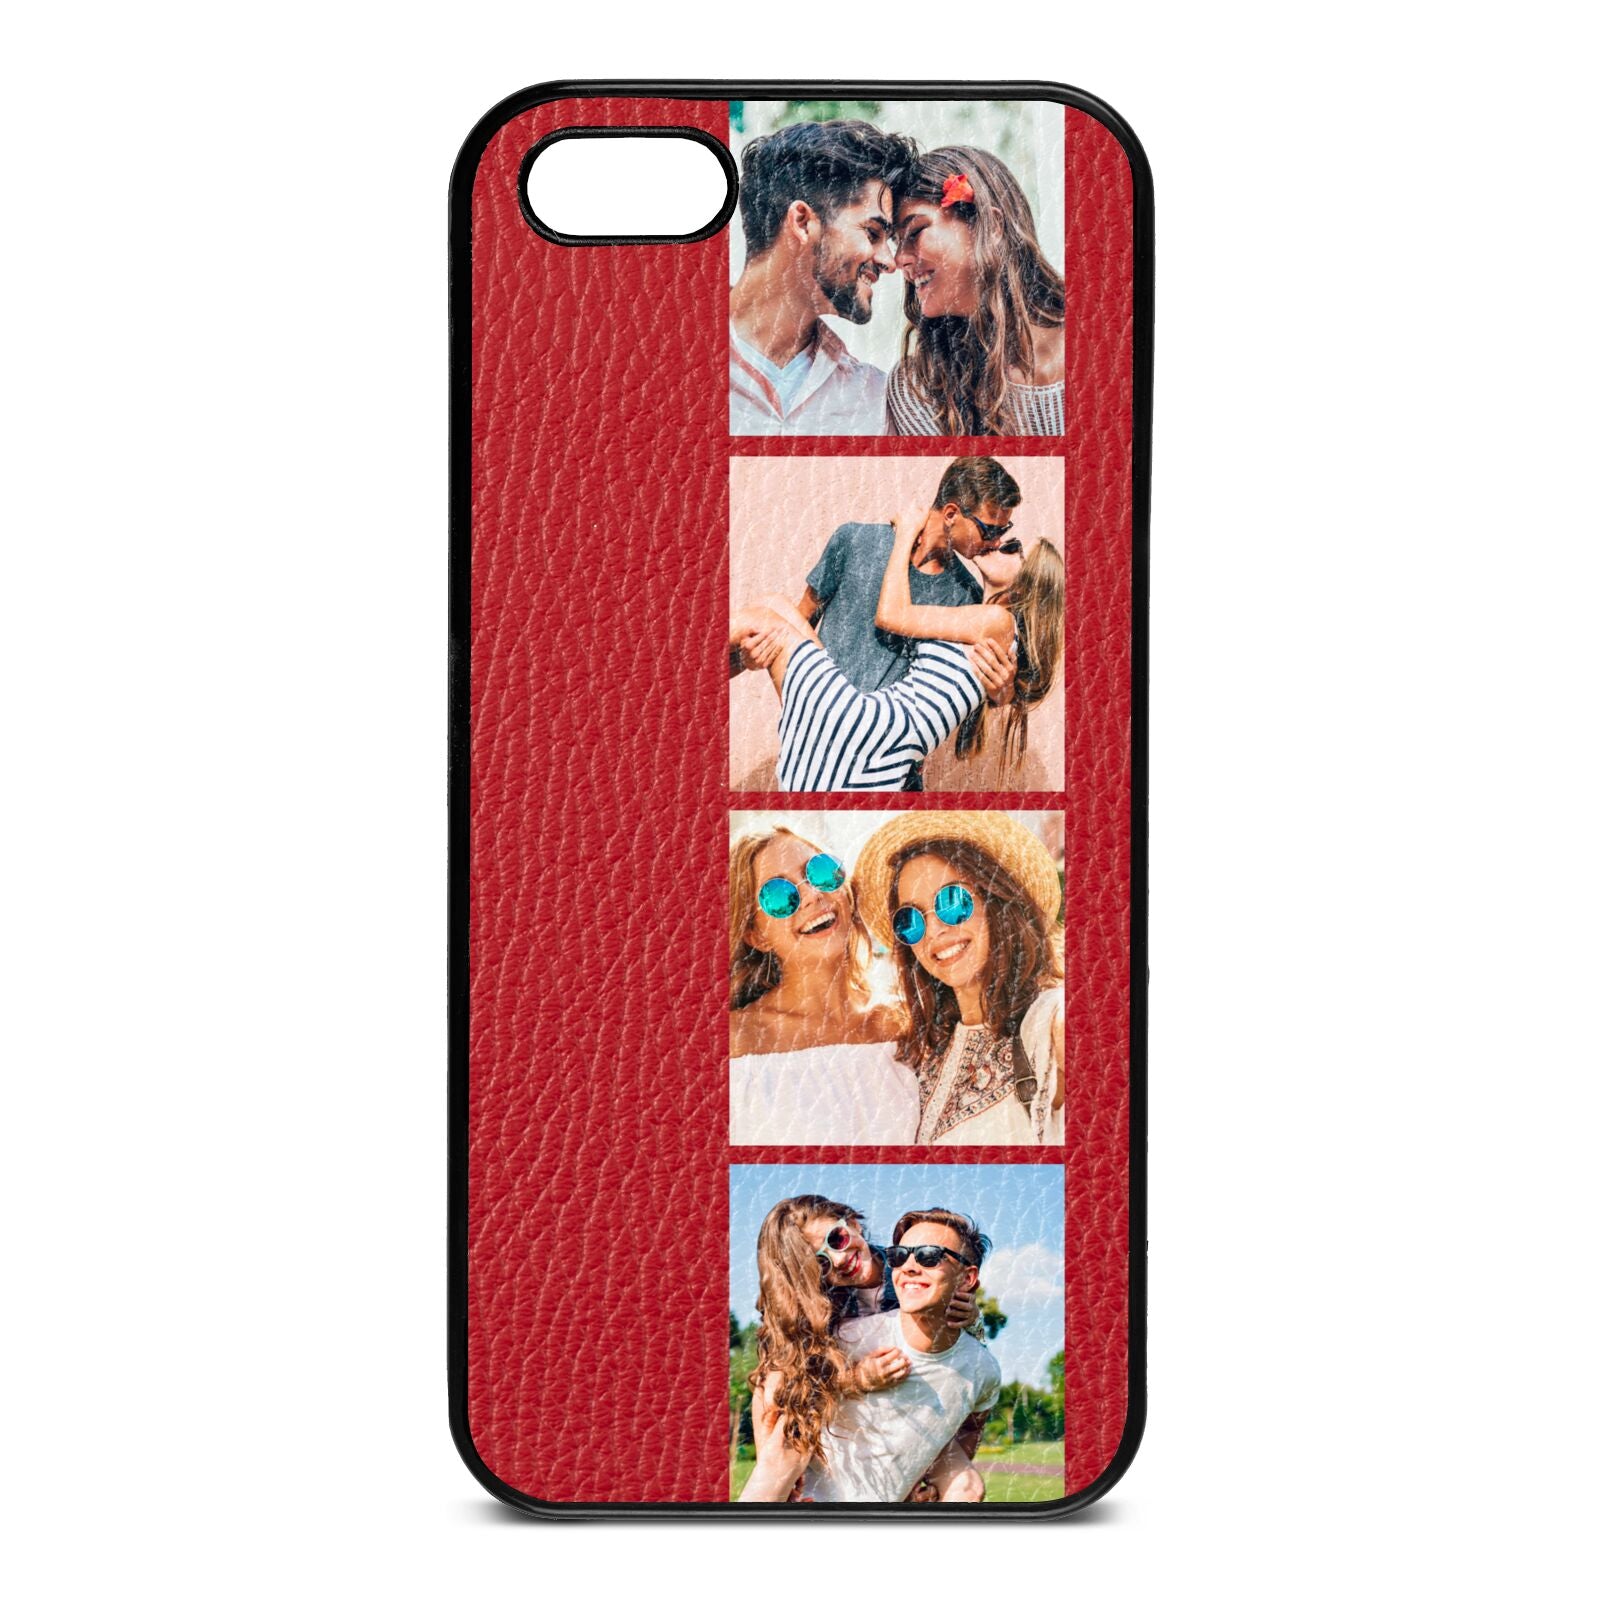 Photo Strip Montage Upload Red Pebble Leather iPhone 5 Case